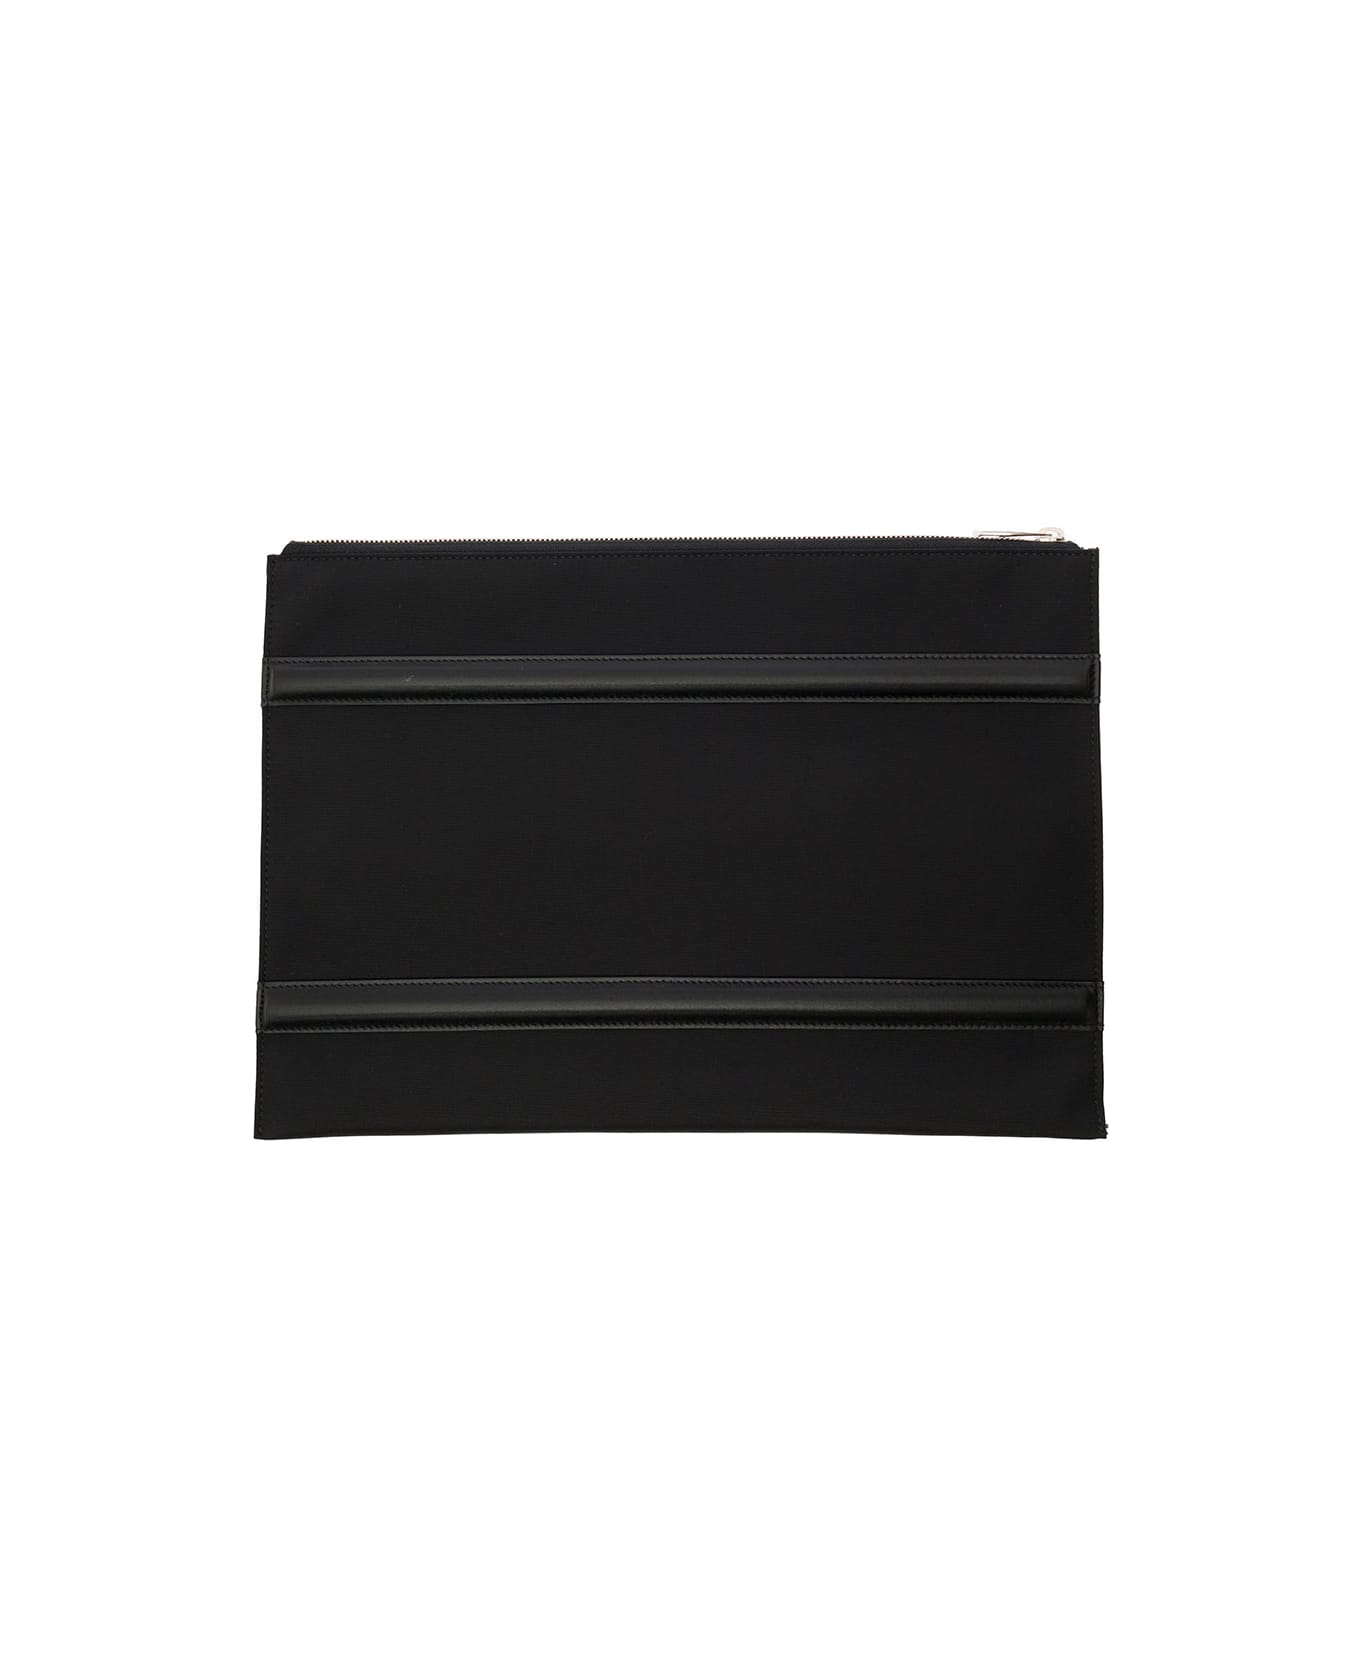 Alexander McQueen Black Pouch With Harness Detail In Nylon Man Alexander Mcqueen - Black